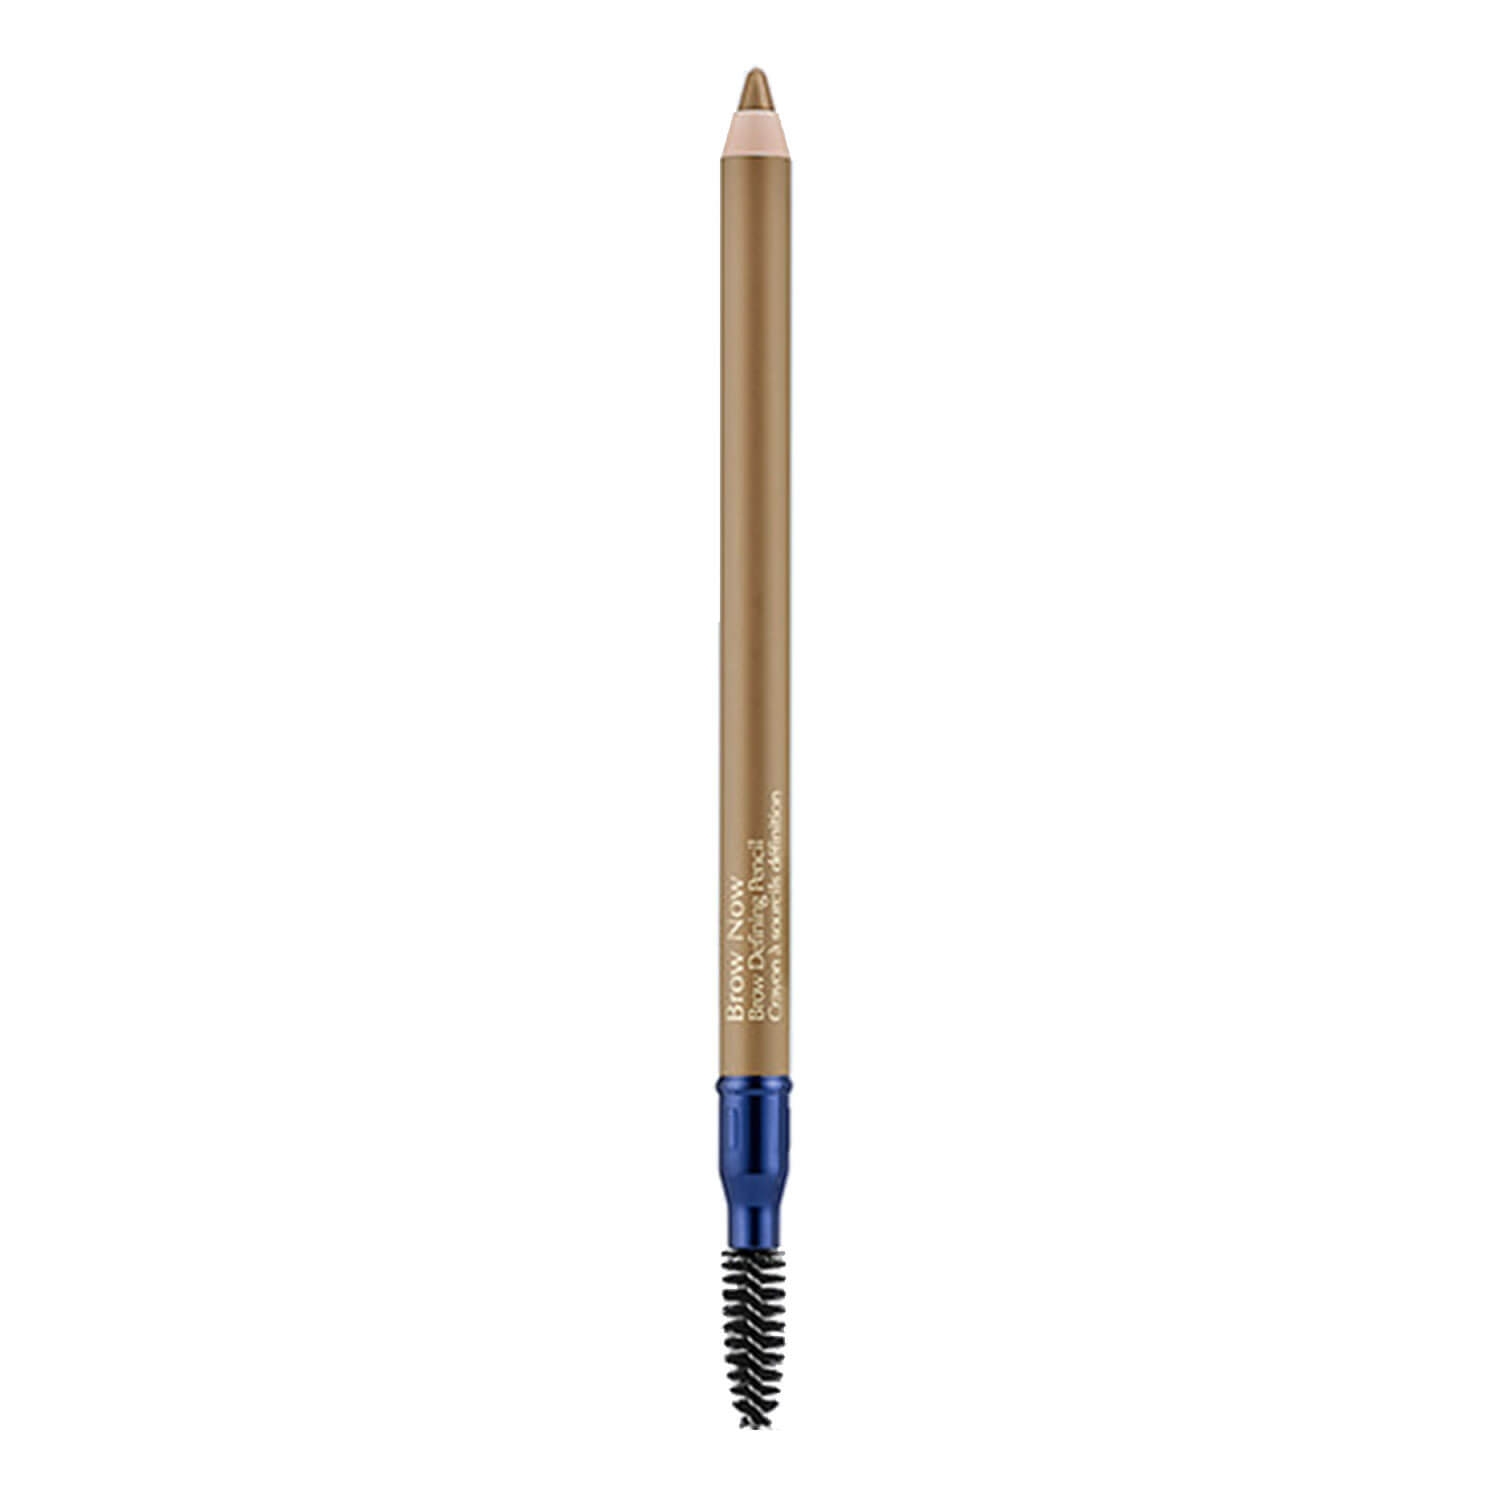 Product image from Brow Now - Brow Defining Pencil 01 Blonde